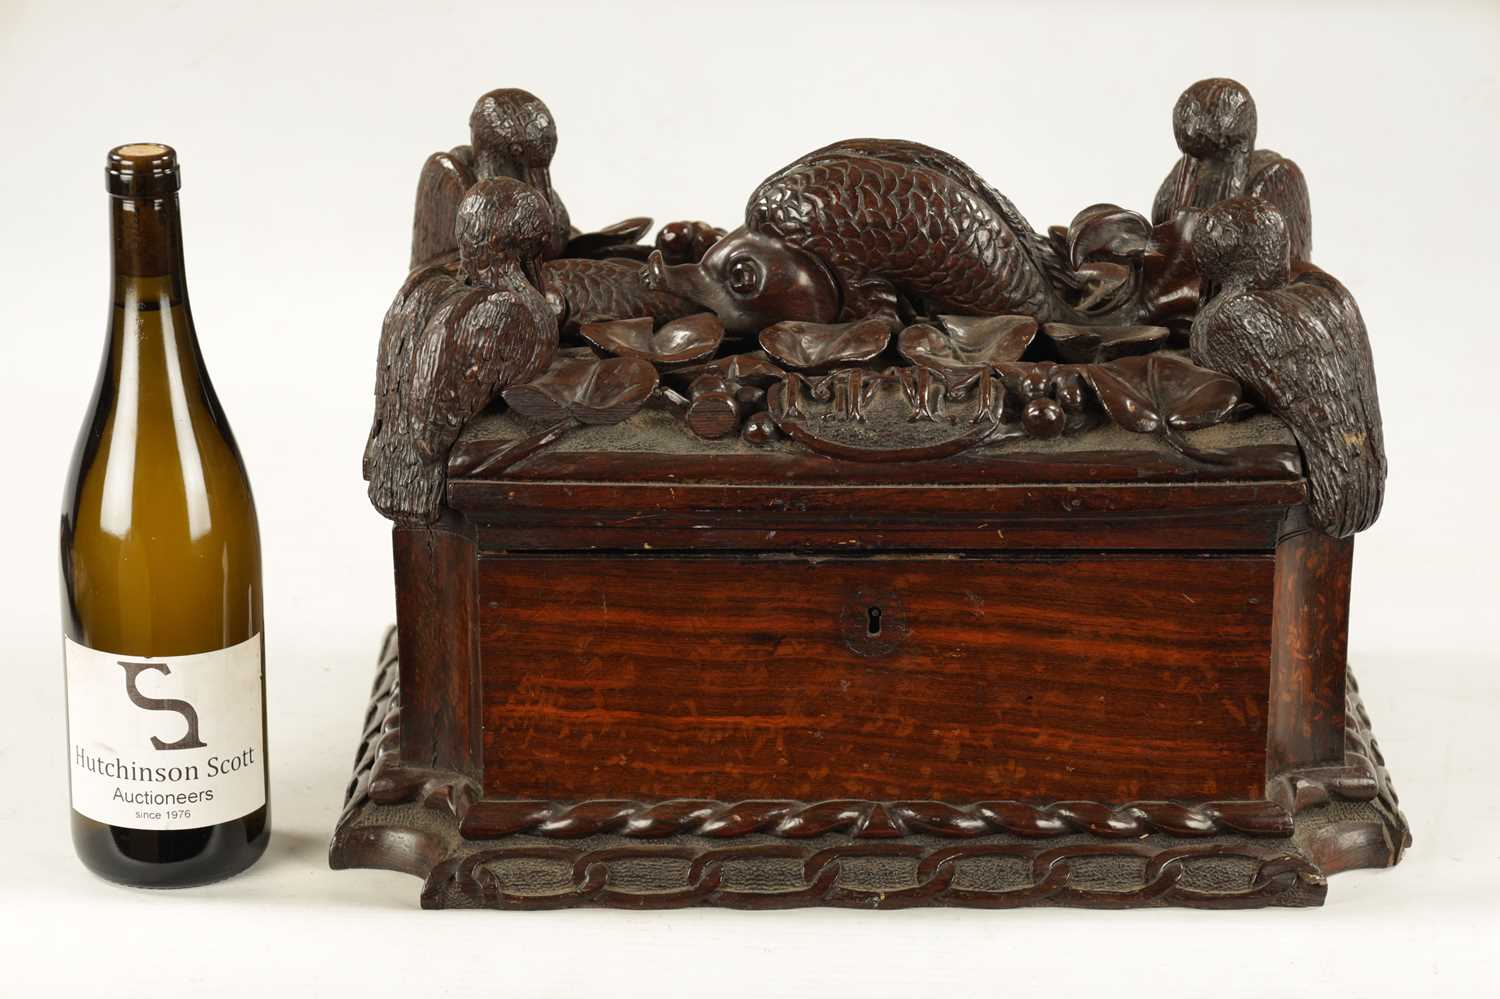 AN IMPRESSIVE 18TH CENTURY CONTINENTAL CARVED HARDWOOD TABLE CASKET - Image 3 of 6